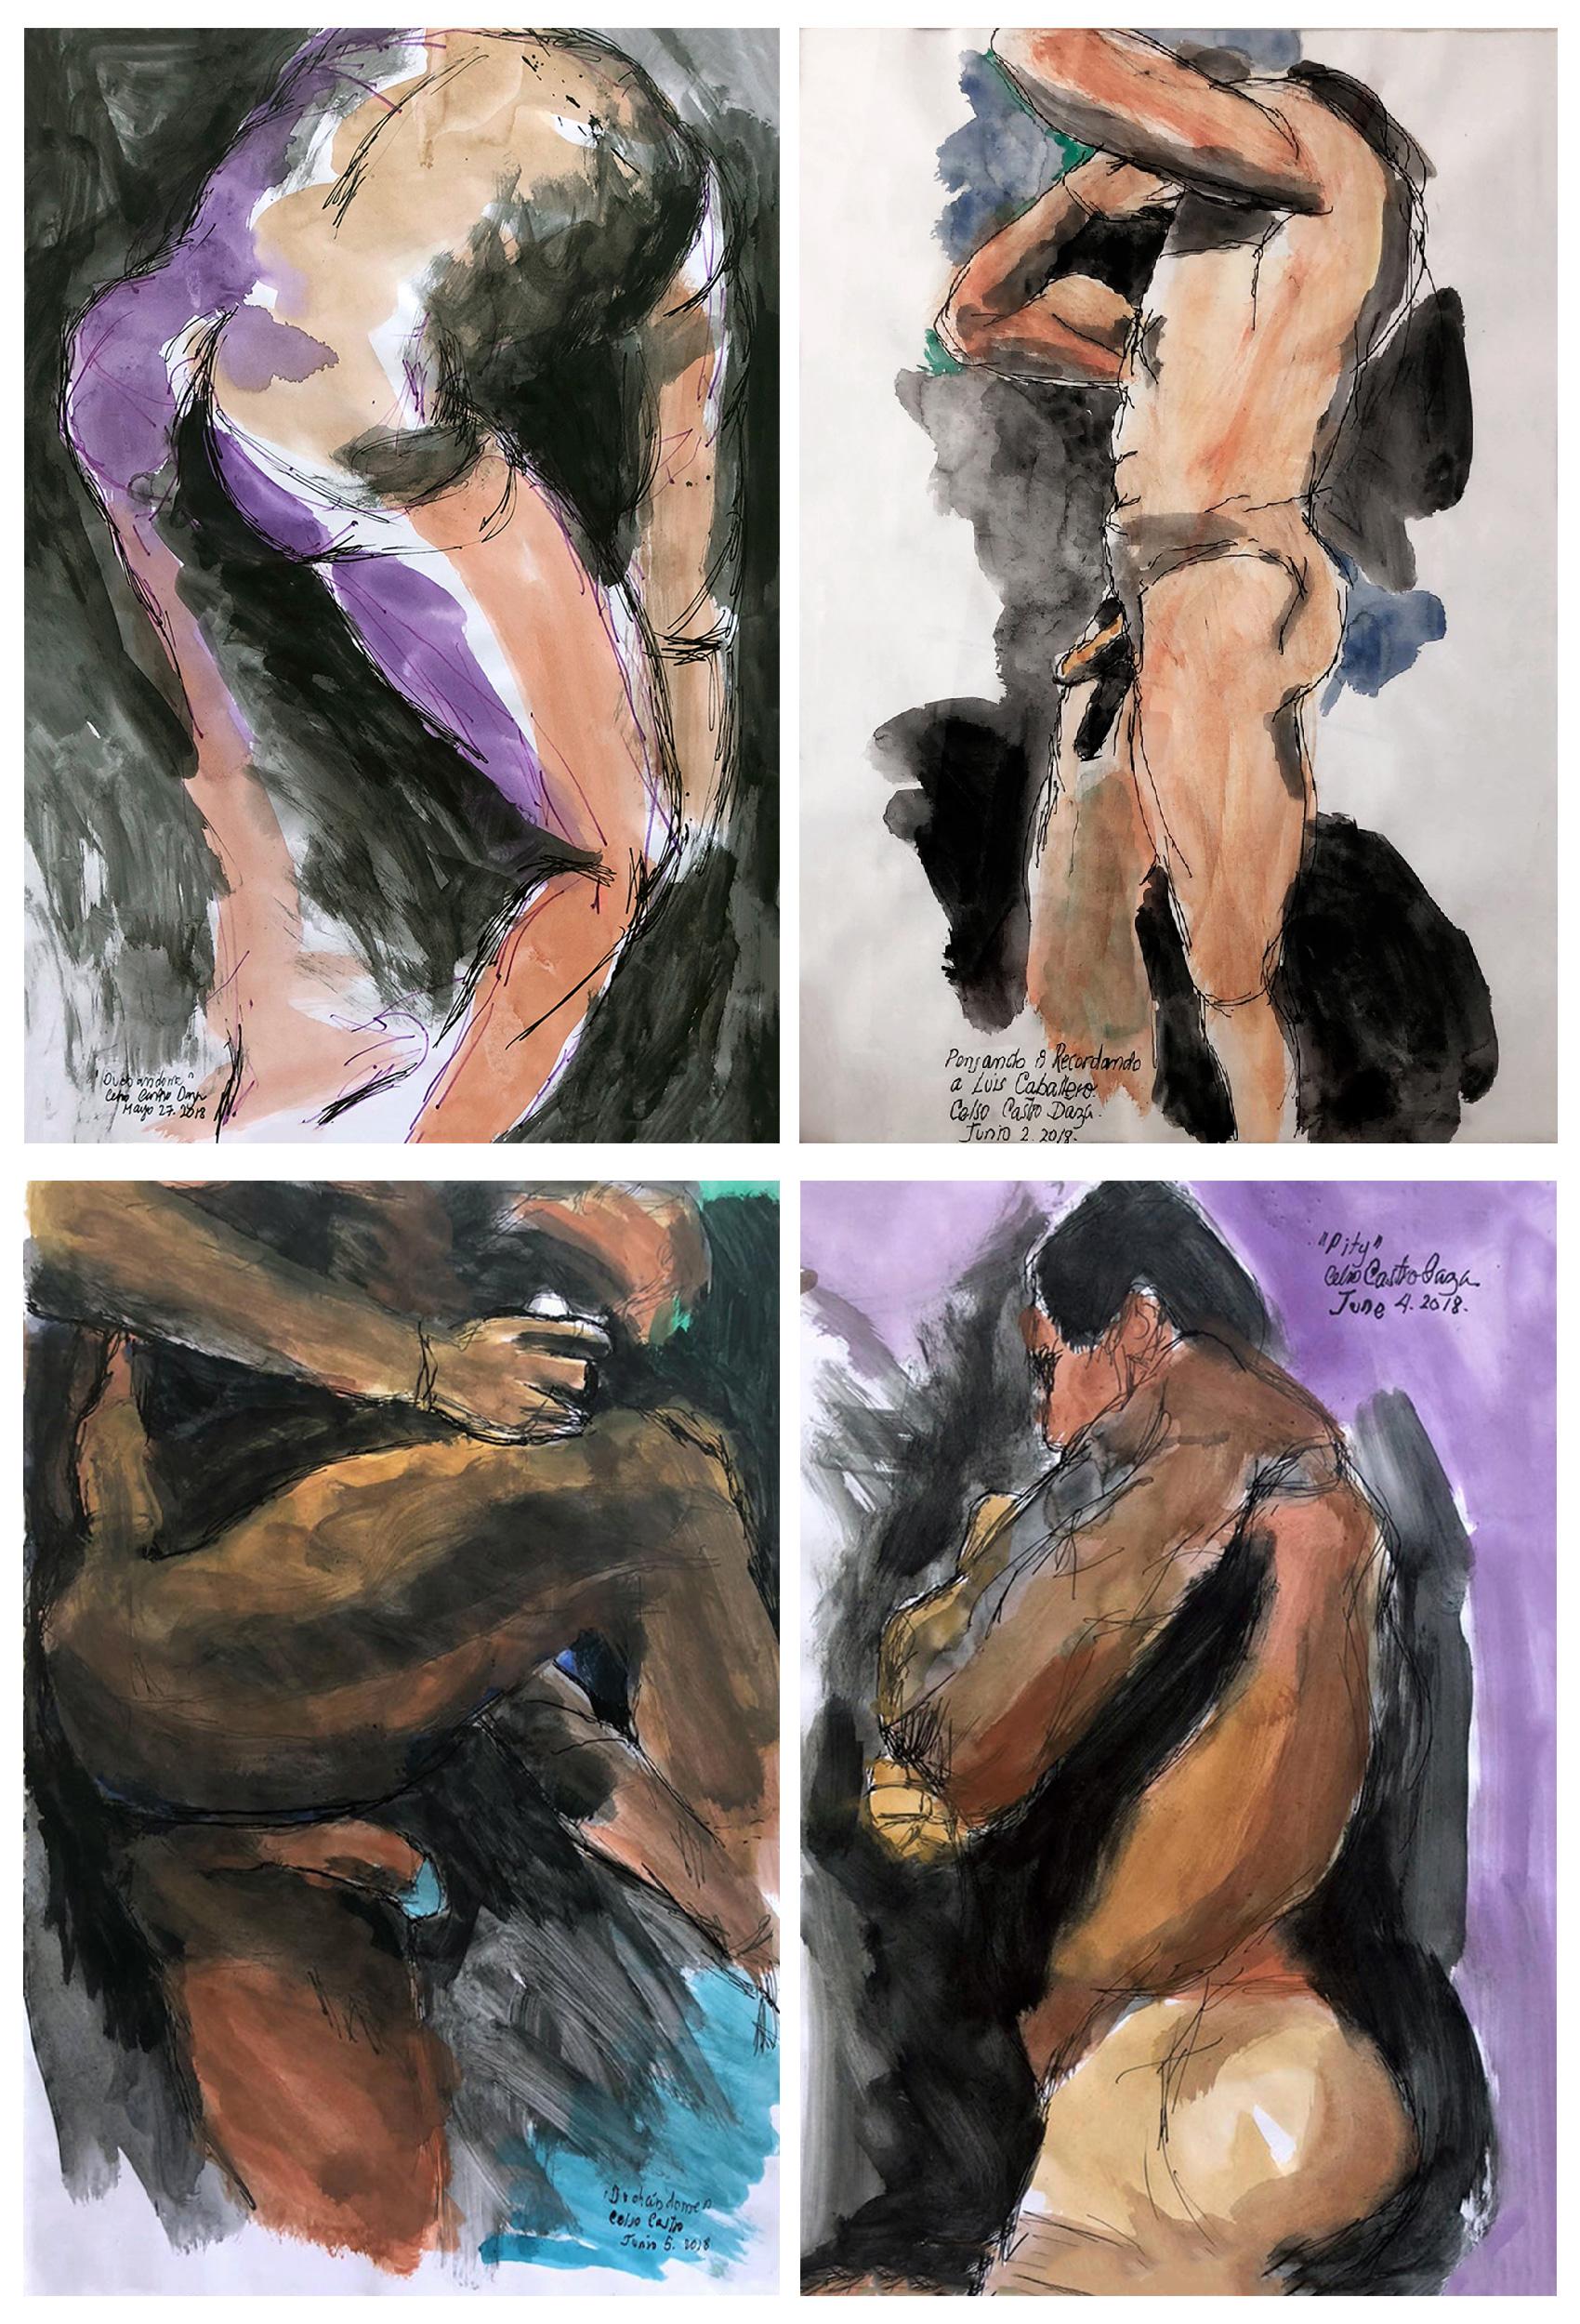 From the Duchándome, Nudes Series. Set of 4 Watercolors on archival paper 